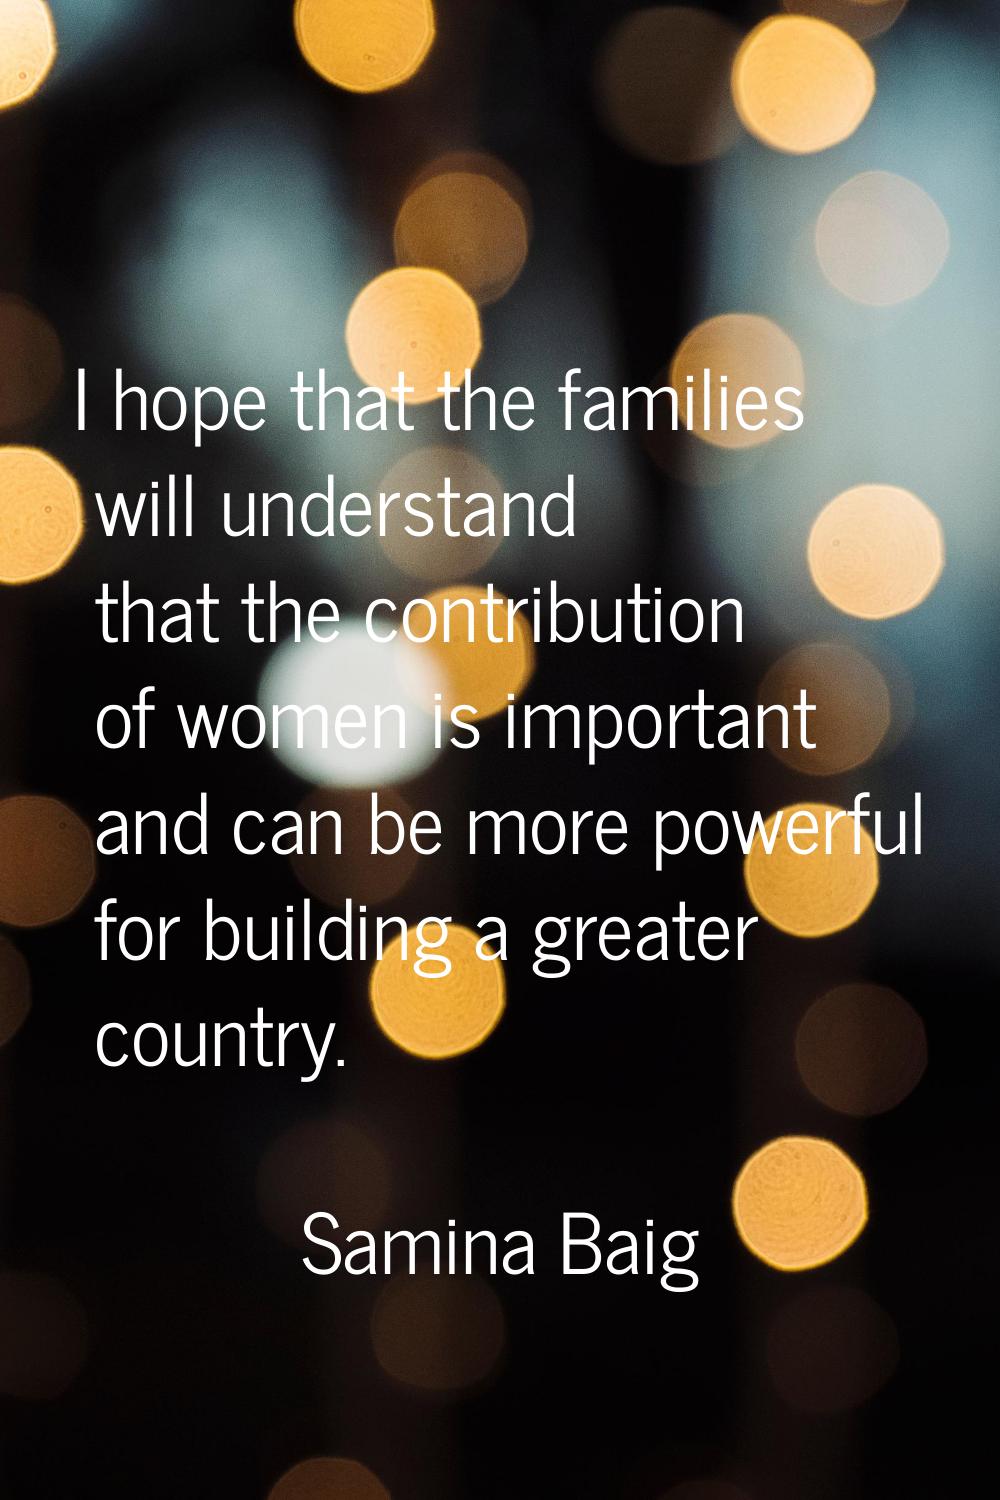 I hope that the families will understand that the contribution of women is important and can be mor